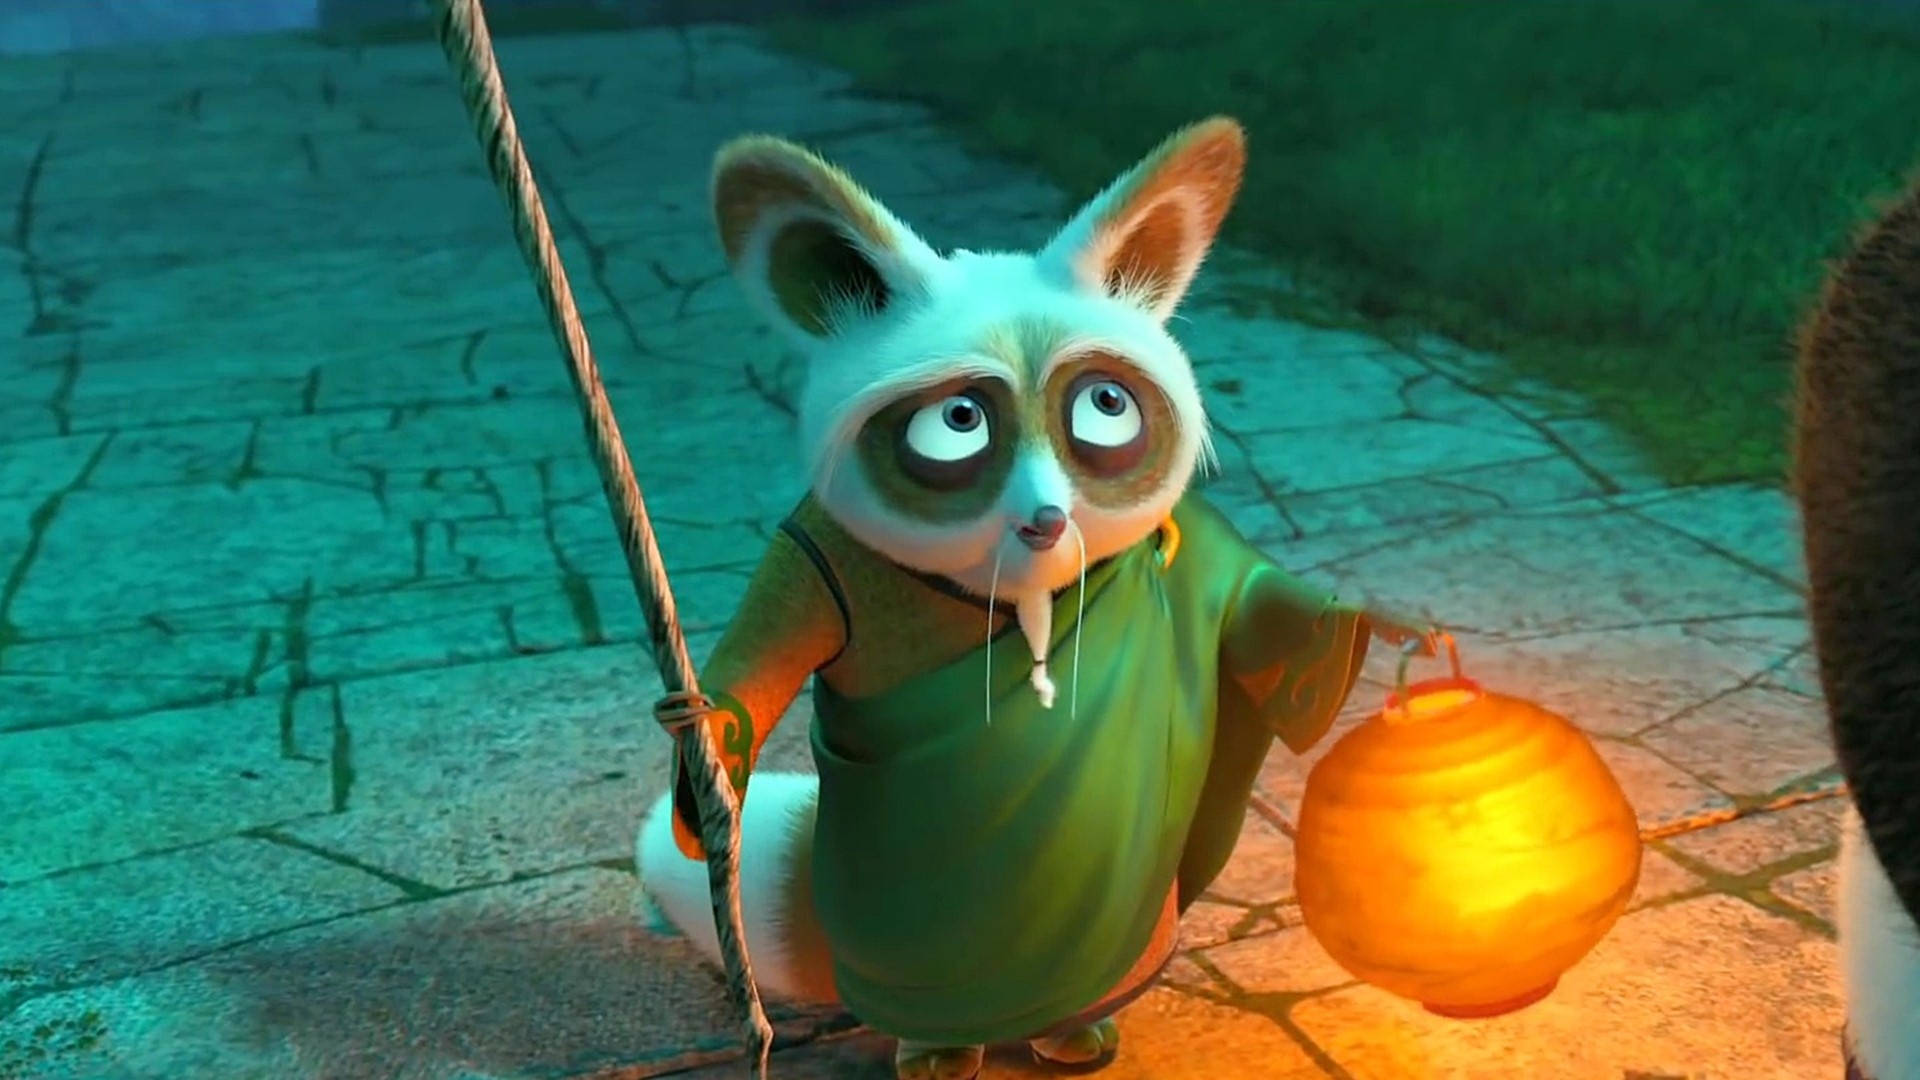 Master Shifu: A very loyal student to Oogway, Took in Tigress when she was a child. 1920x1080 Full HD Background.